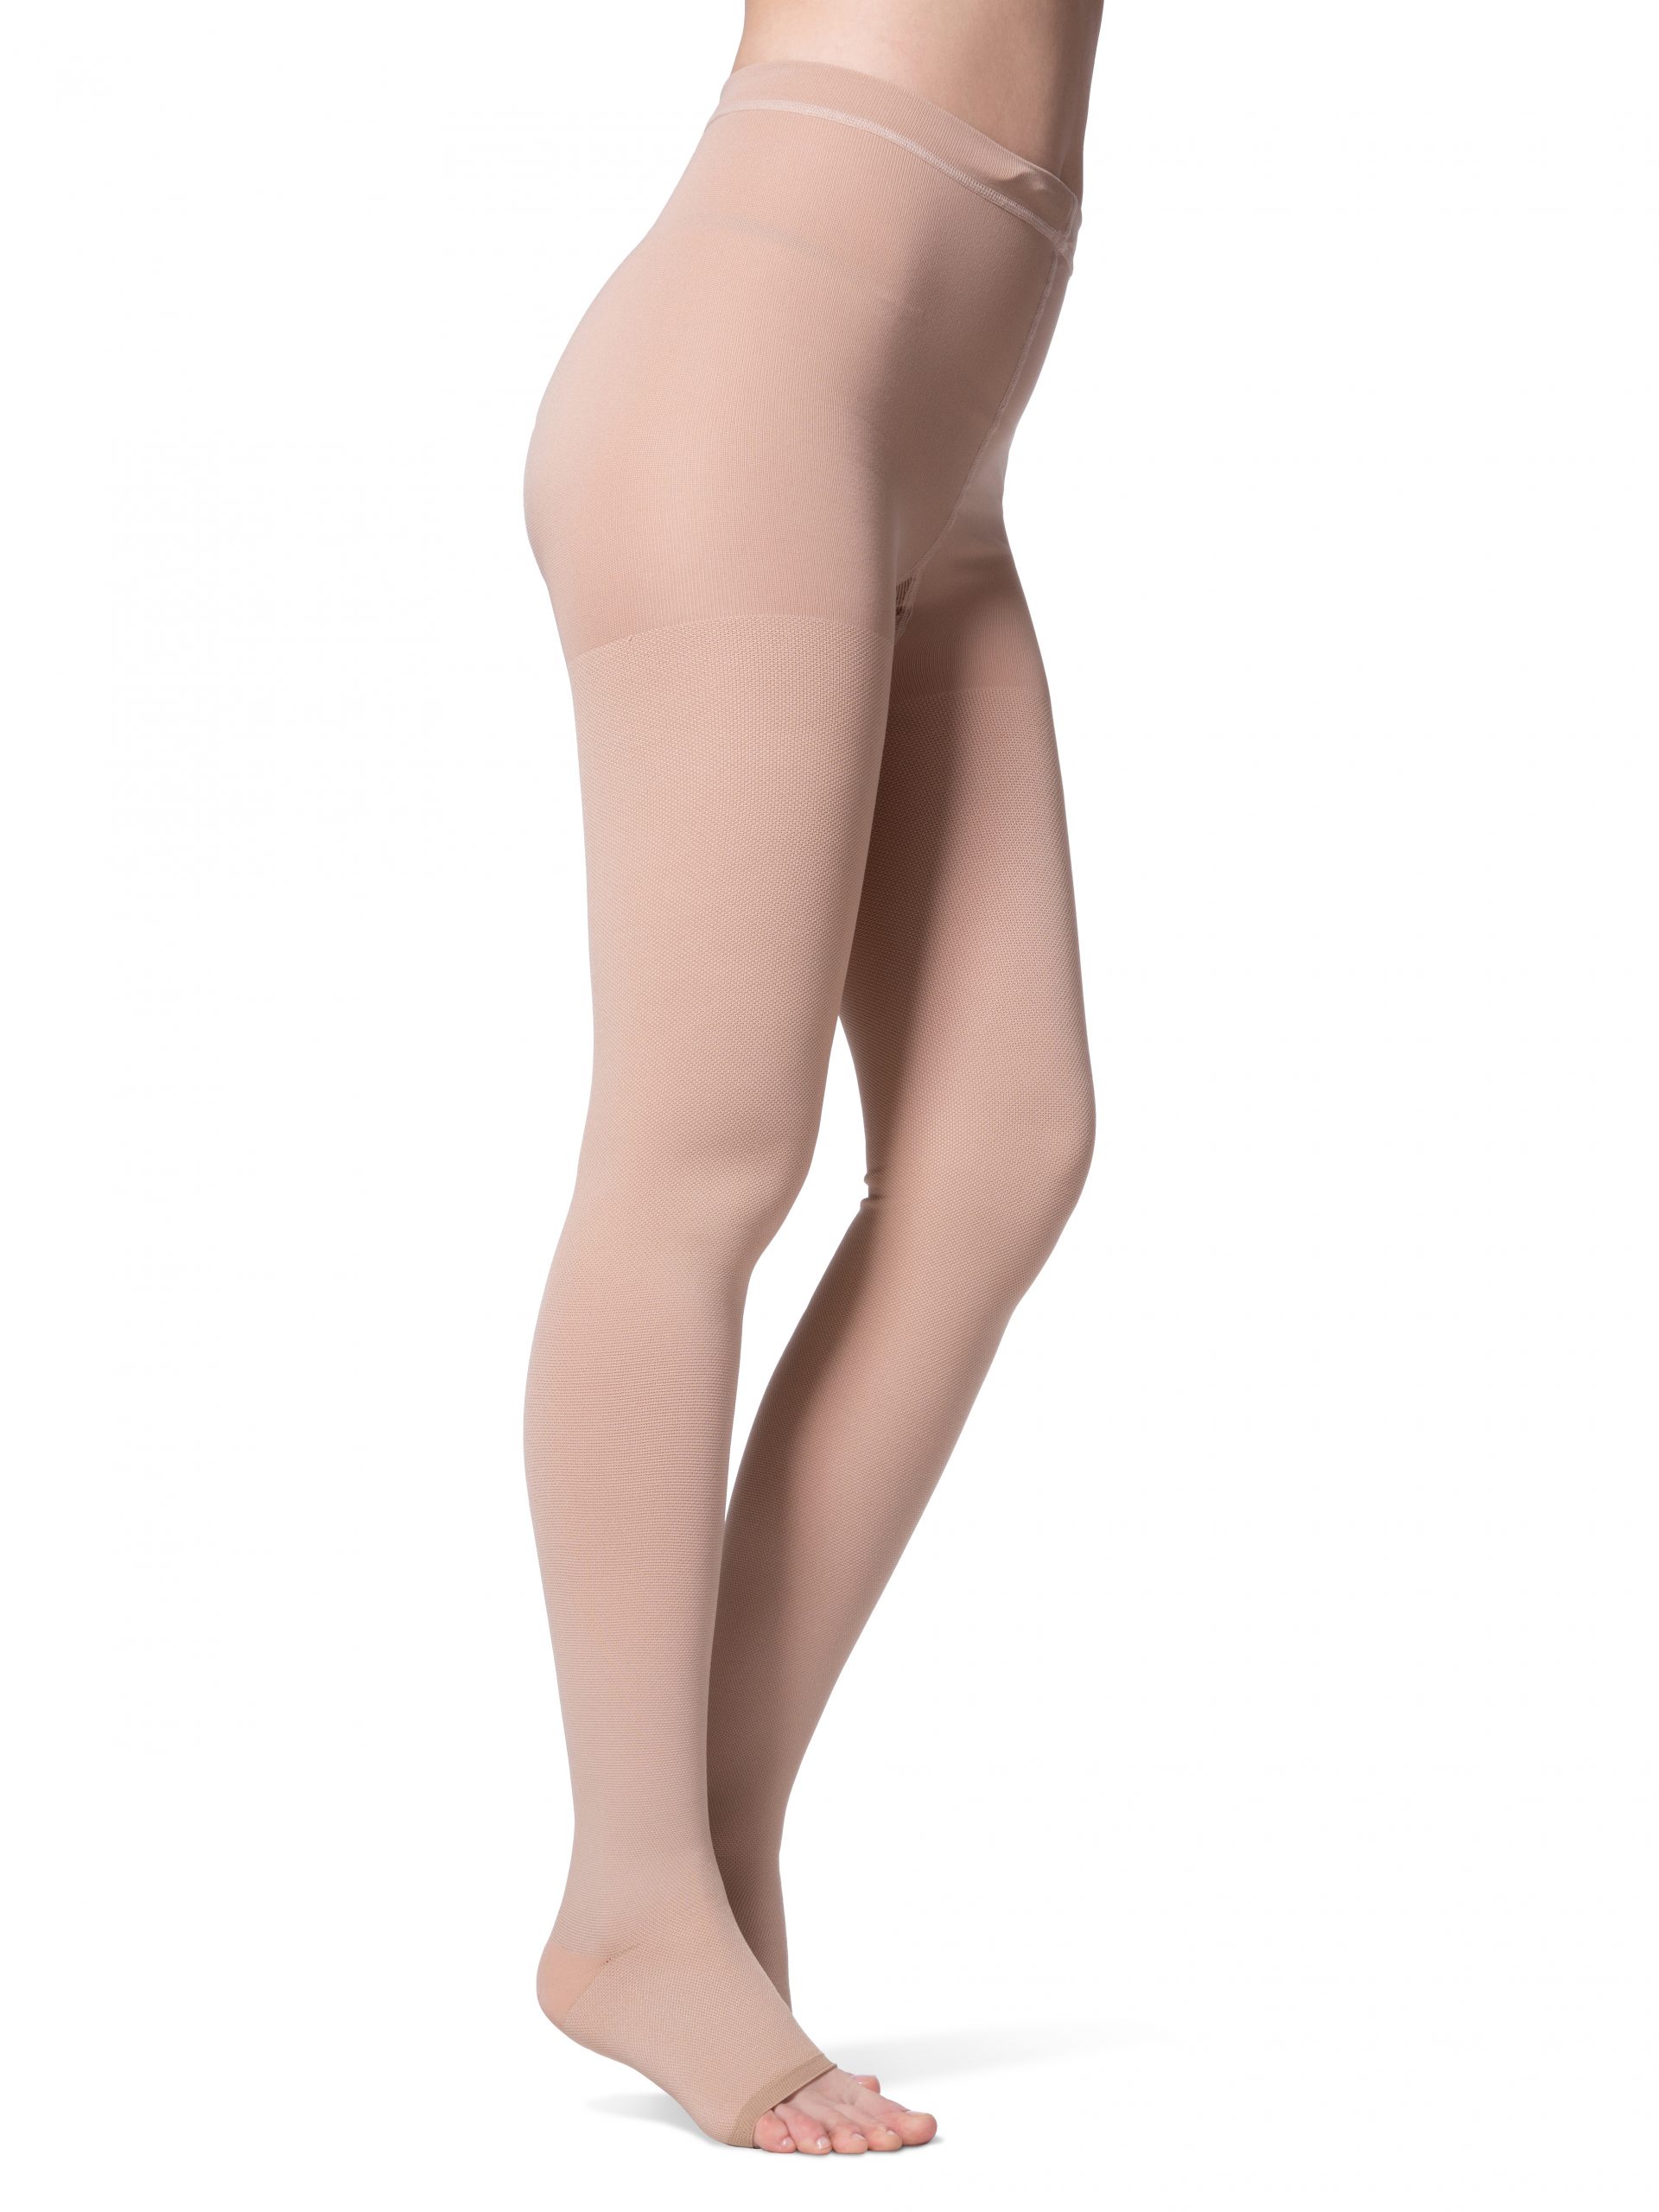 Discontinued Style! Maternity Open-Toe Tights | Great Pair Store